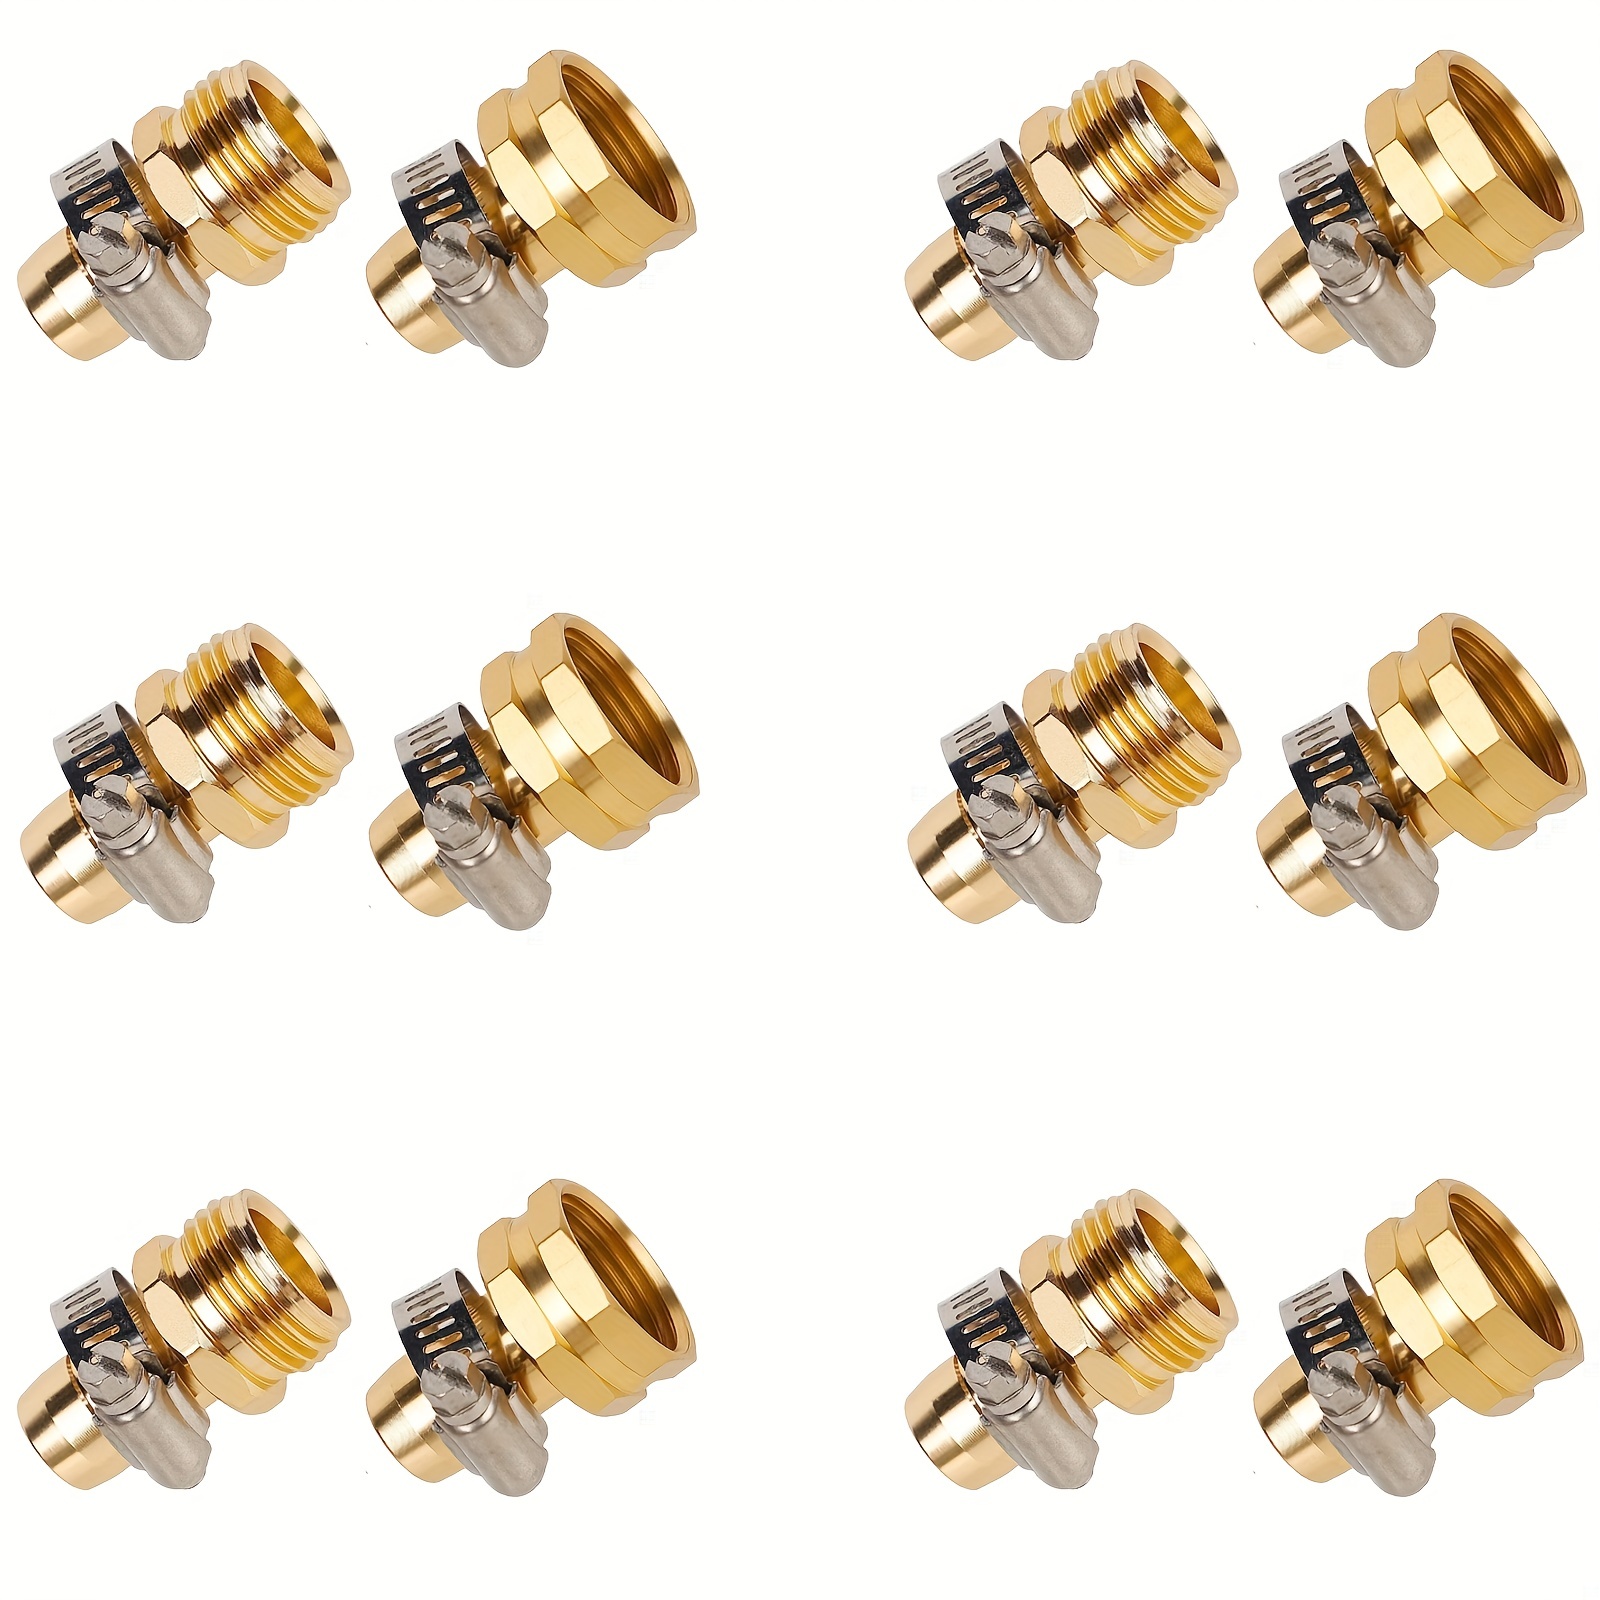 6 Sets 3/4 Aluminum Garden Hose Repair Quick Connector With Clamps, Fit  For 3/4 Or 5/8 Garden Hose Fitting